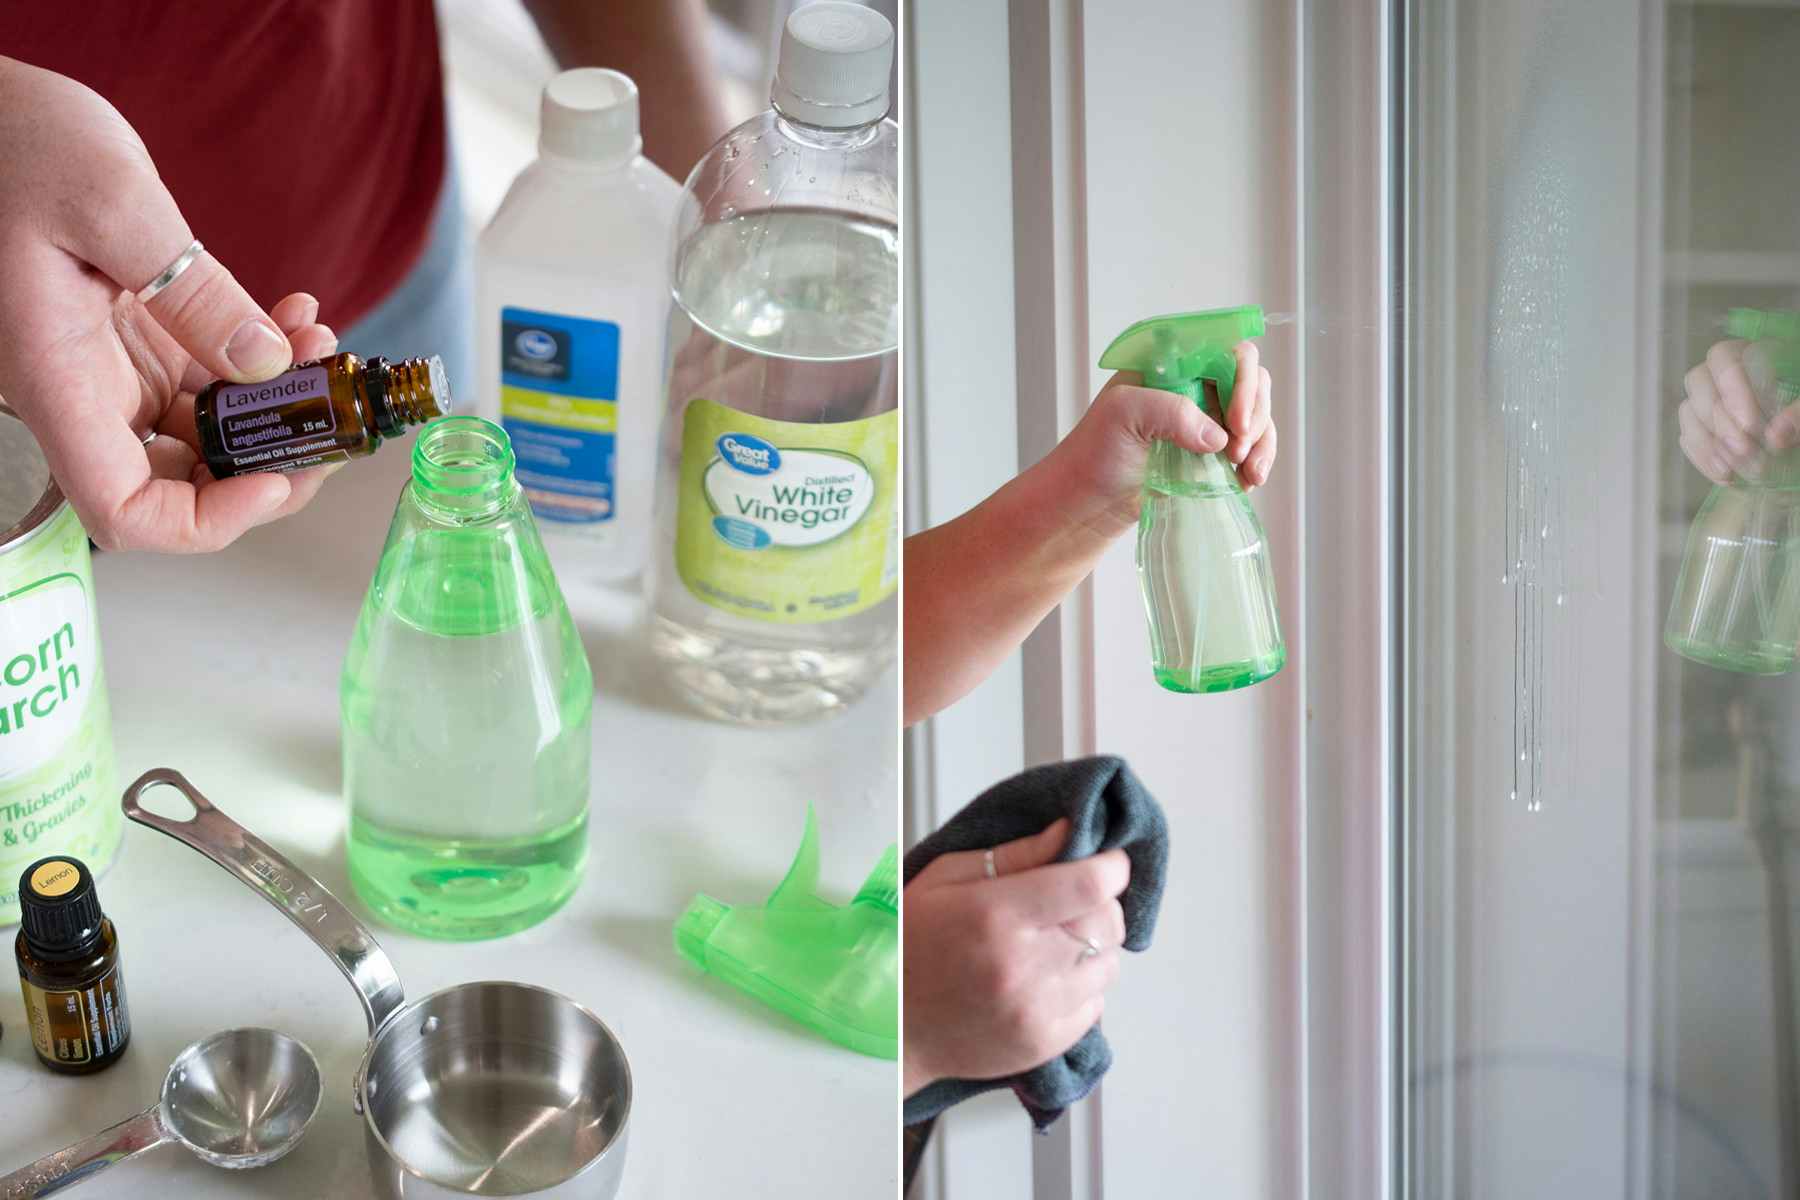 Make glass cleaner instead of buying it.